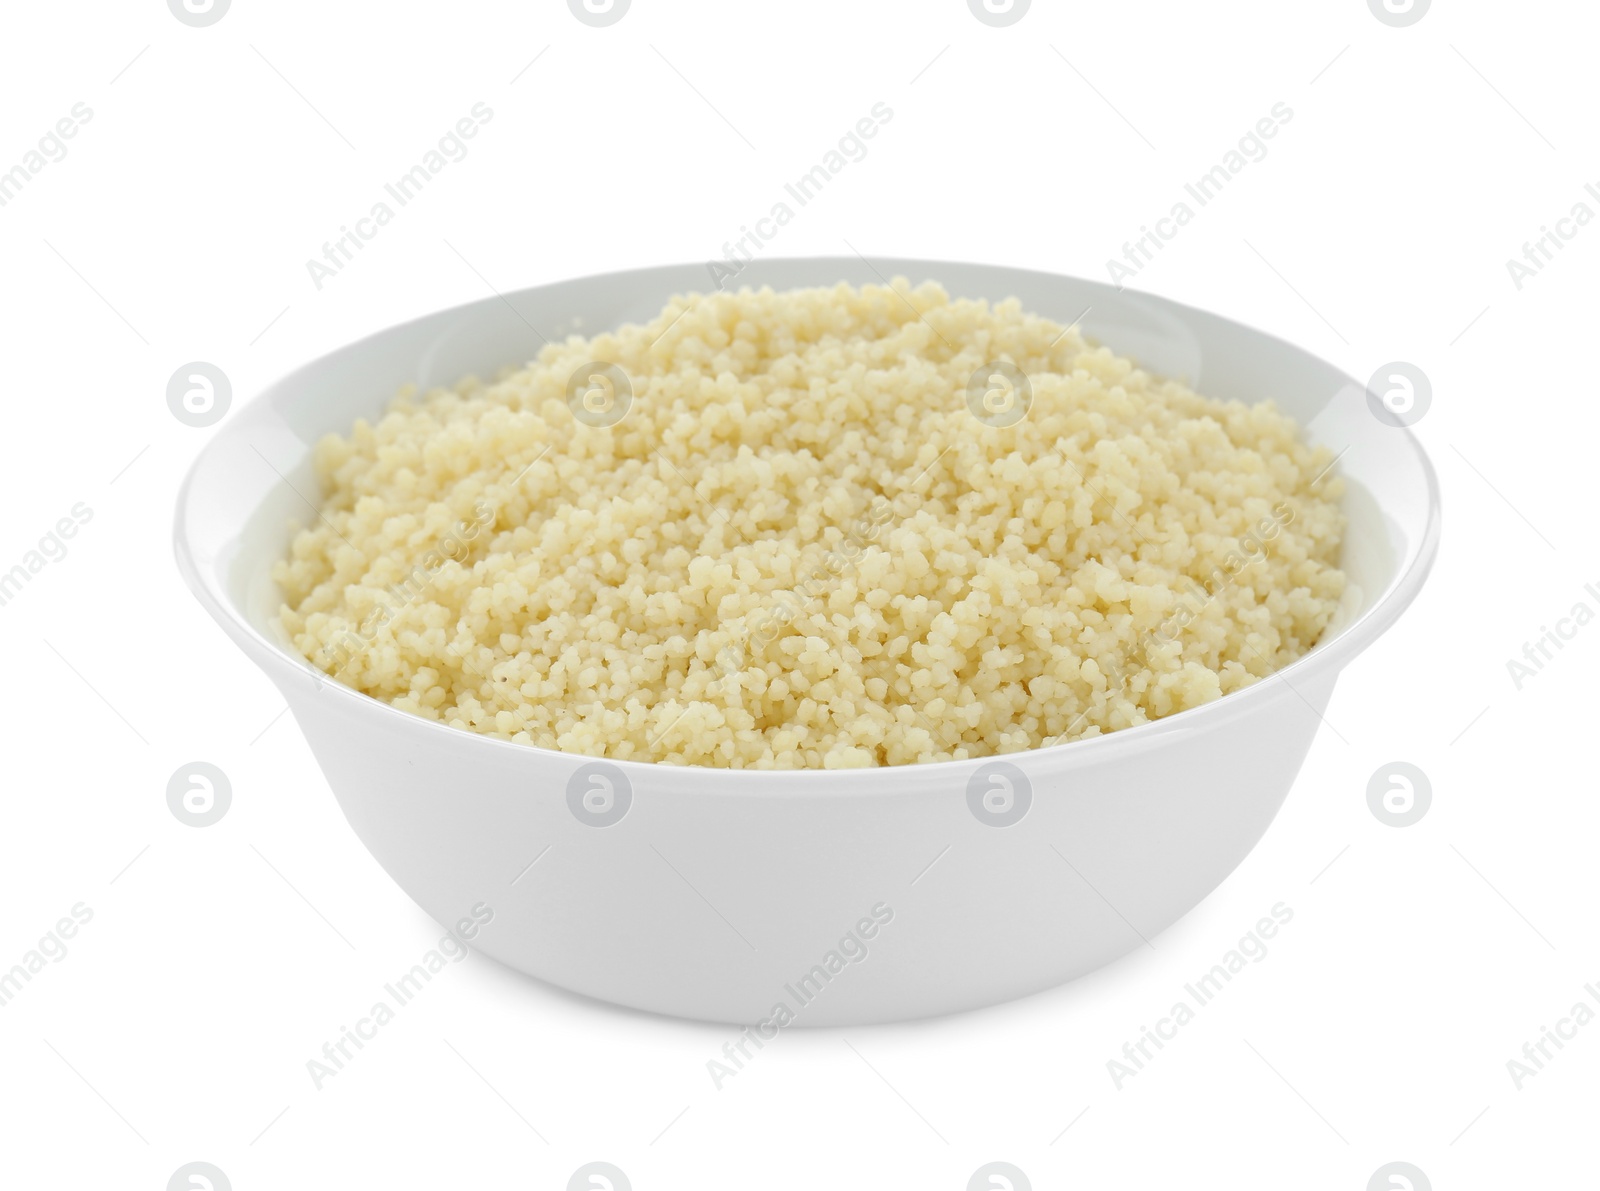 Photo of Bowl of tasty couscous on white background